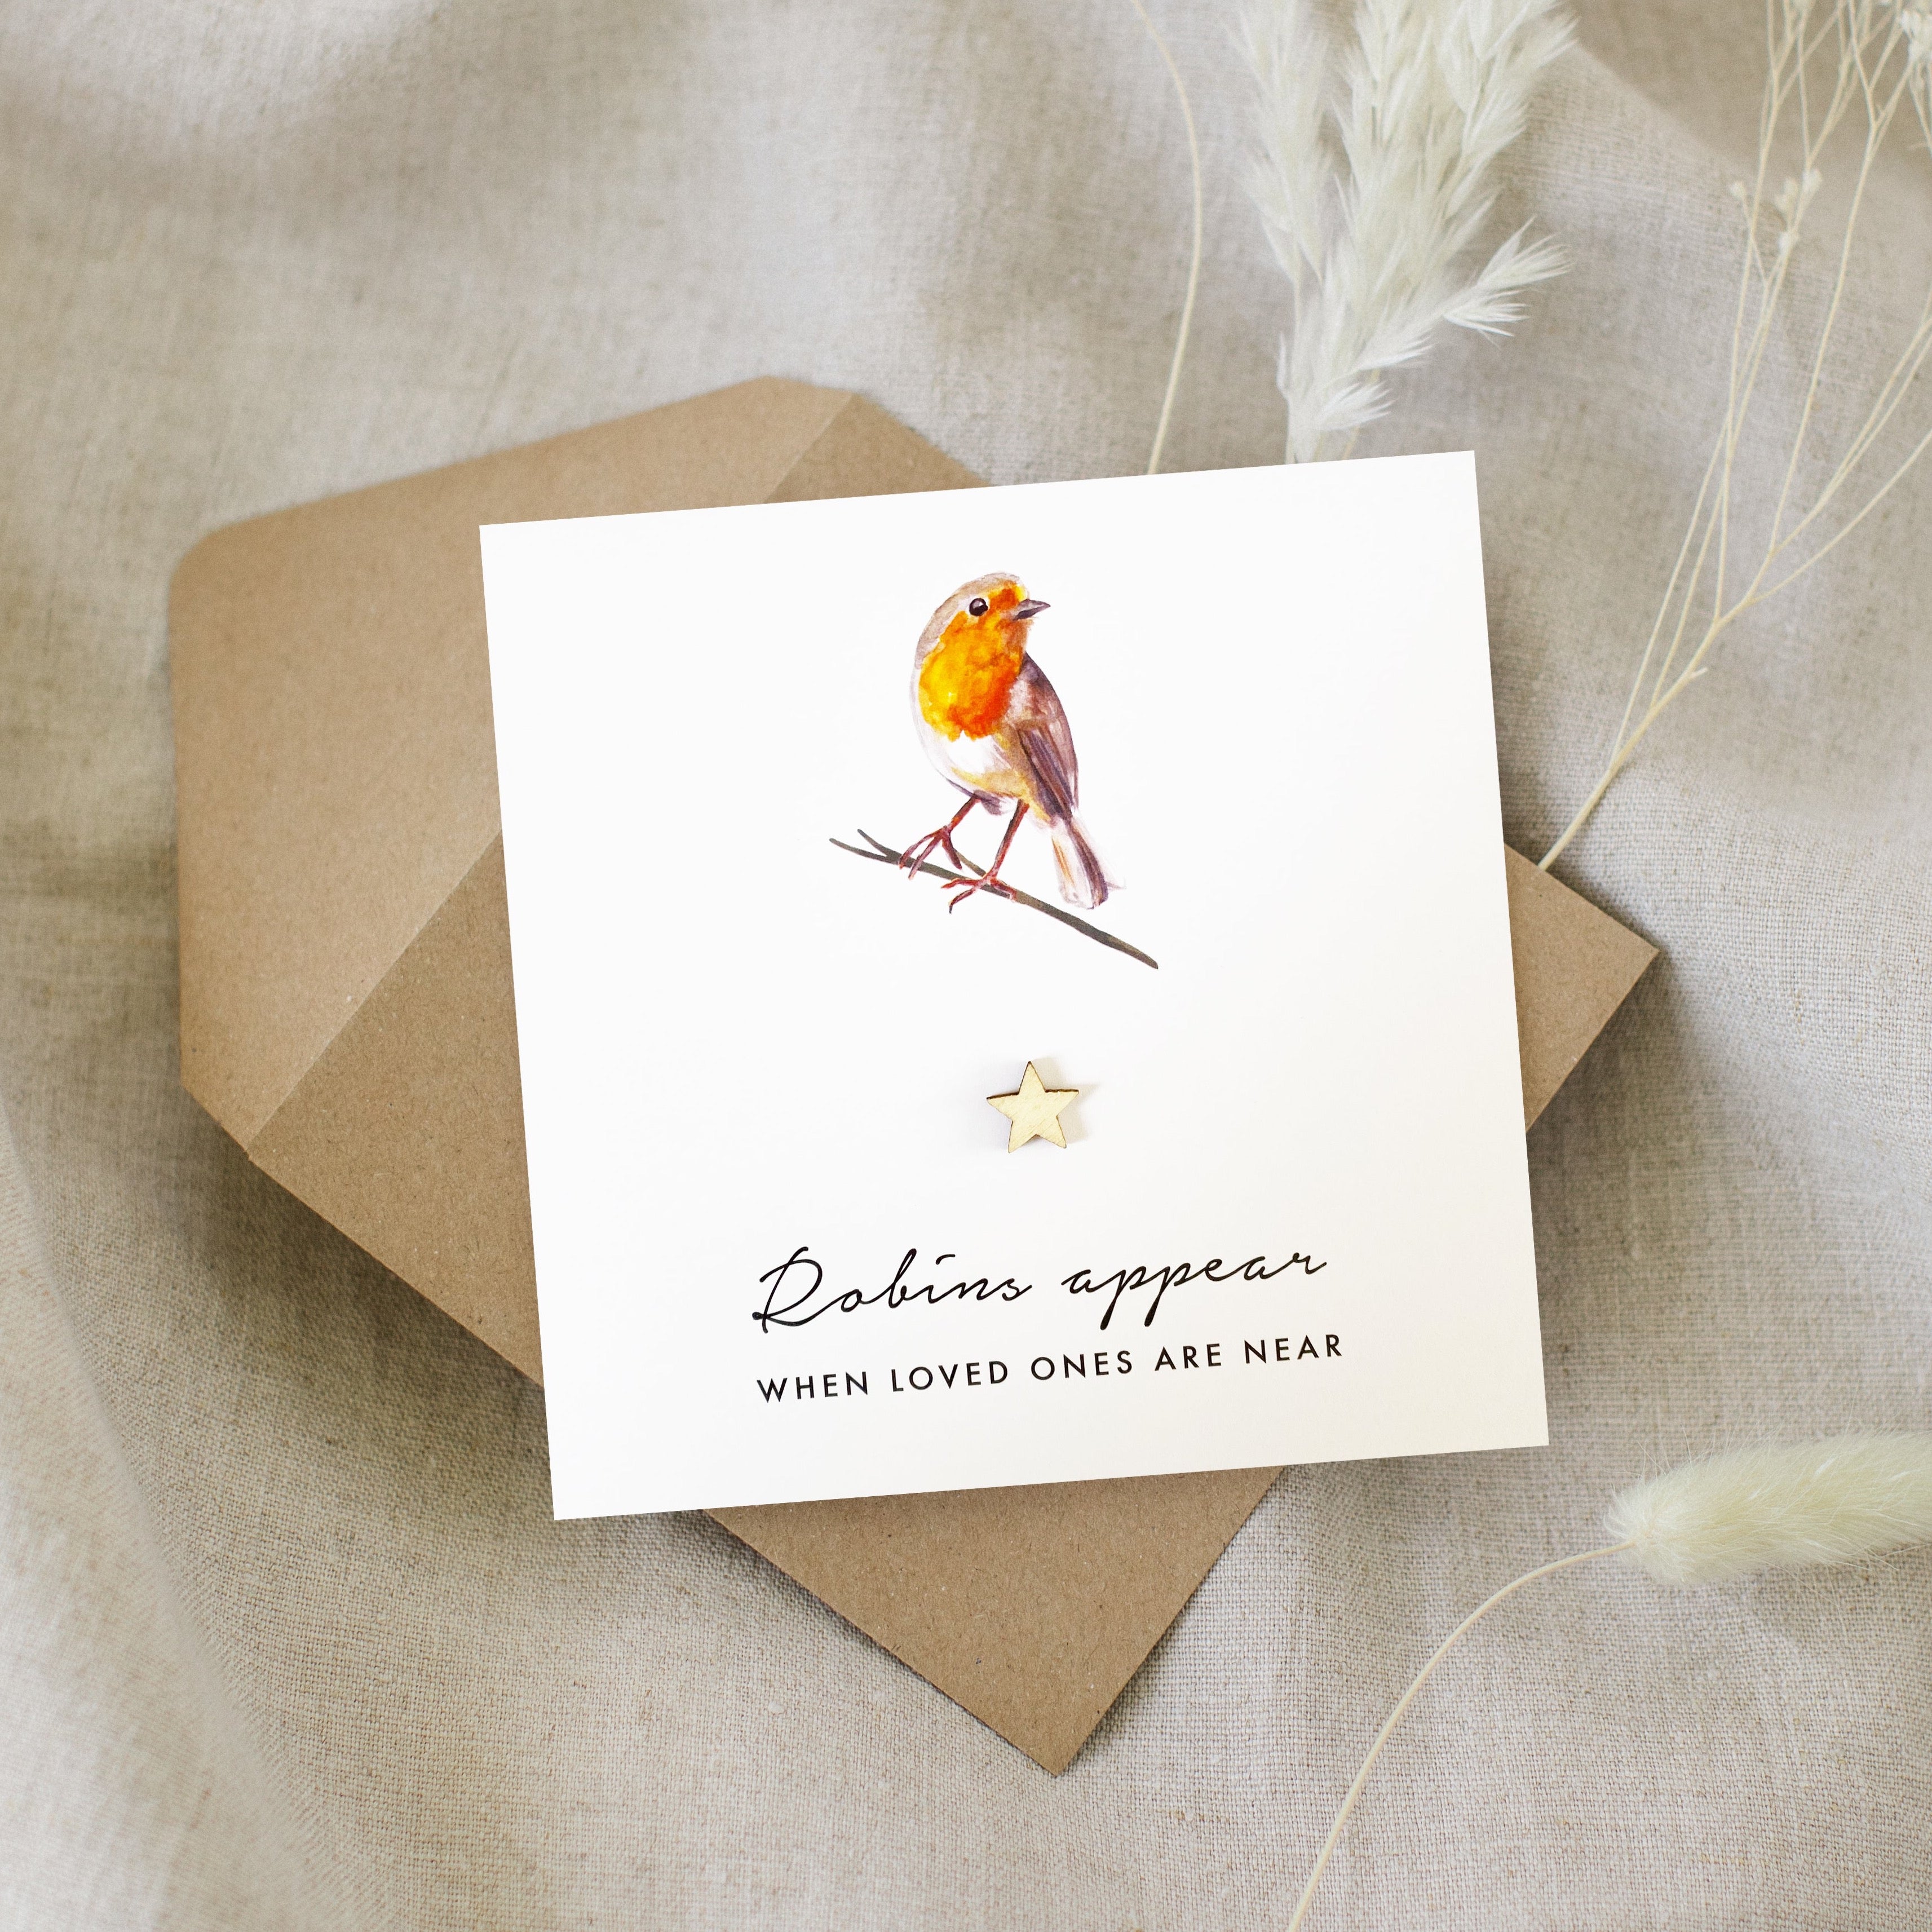 Robins Appear When Loved One's Are Near Card